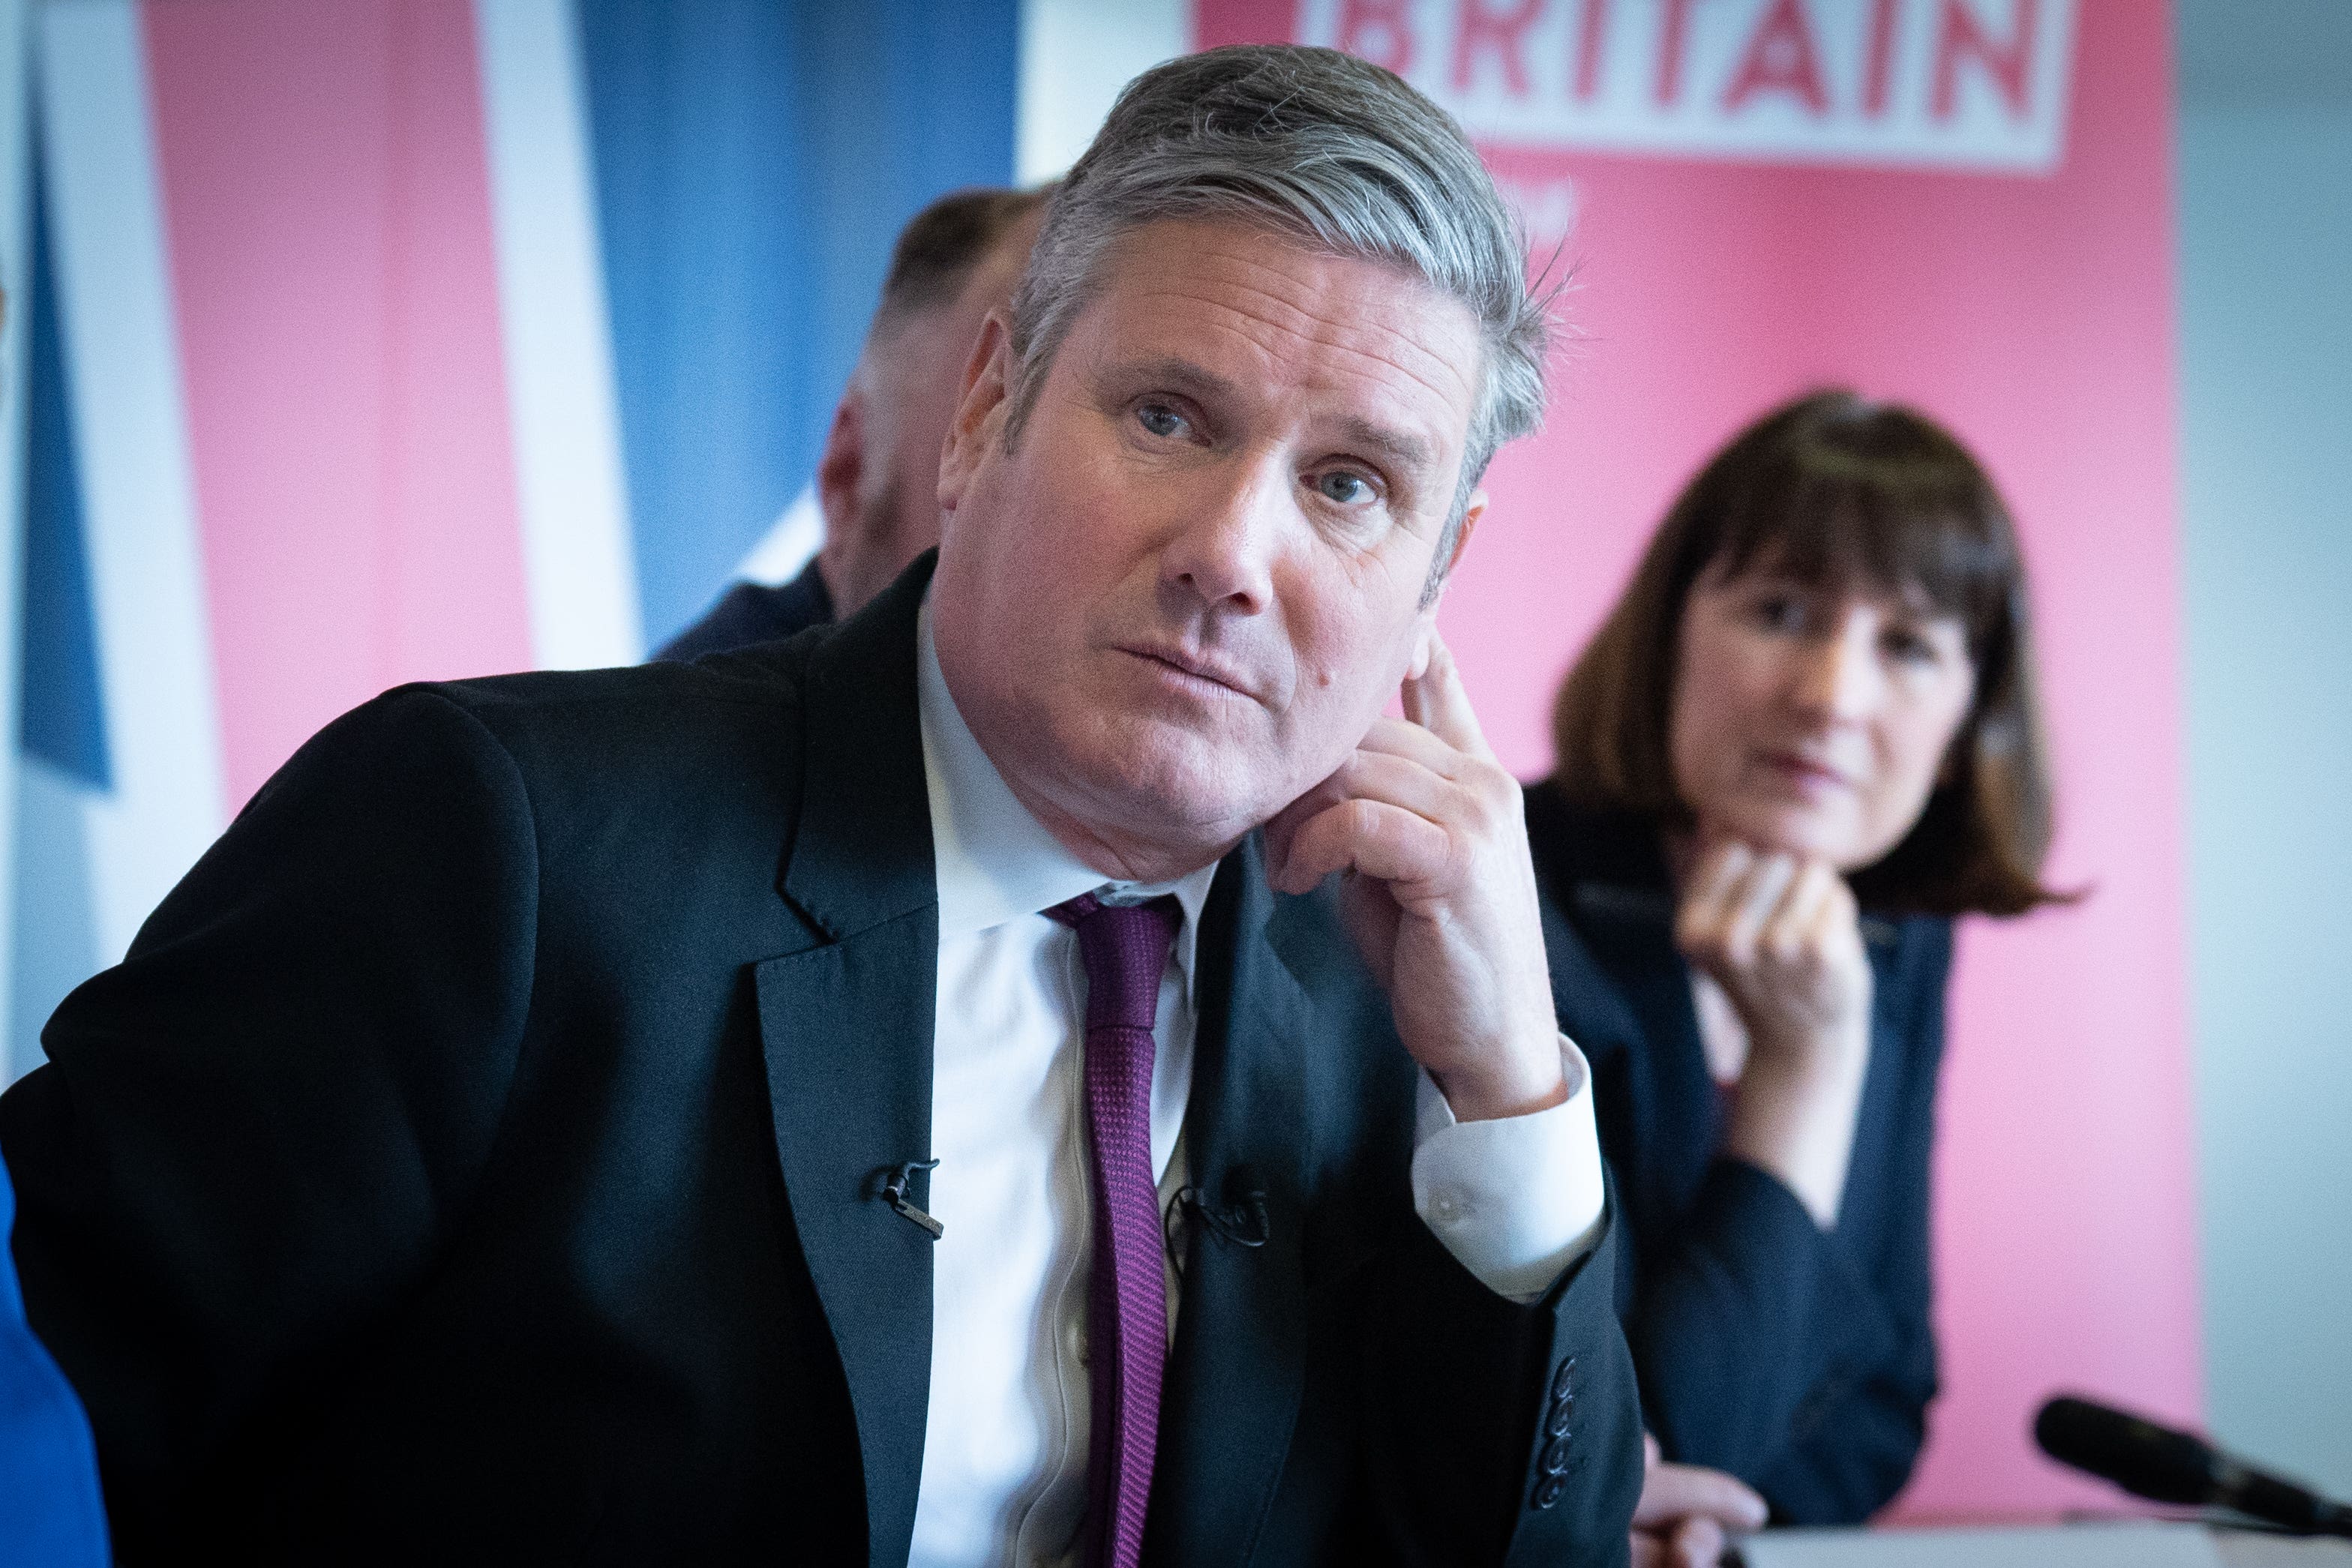 Keir Starmer and shadow chancellor Rachel Reeves face a challenge from unions